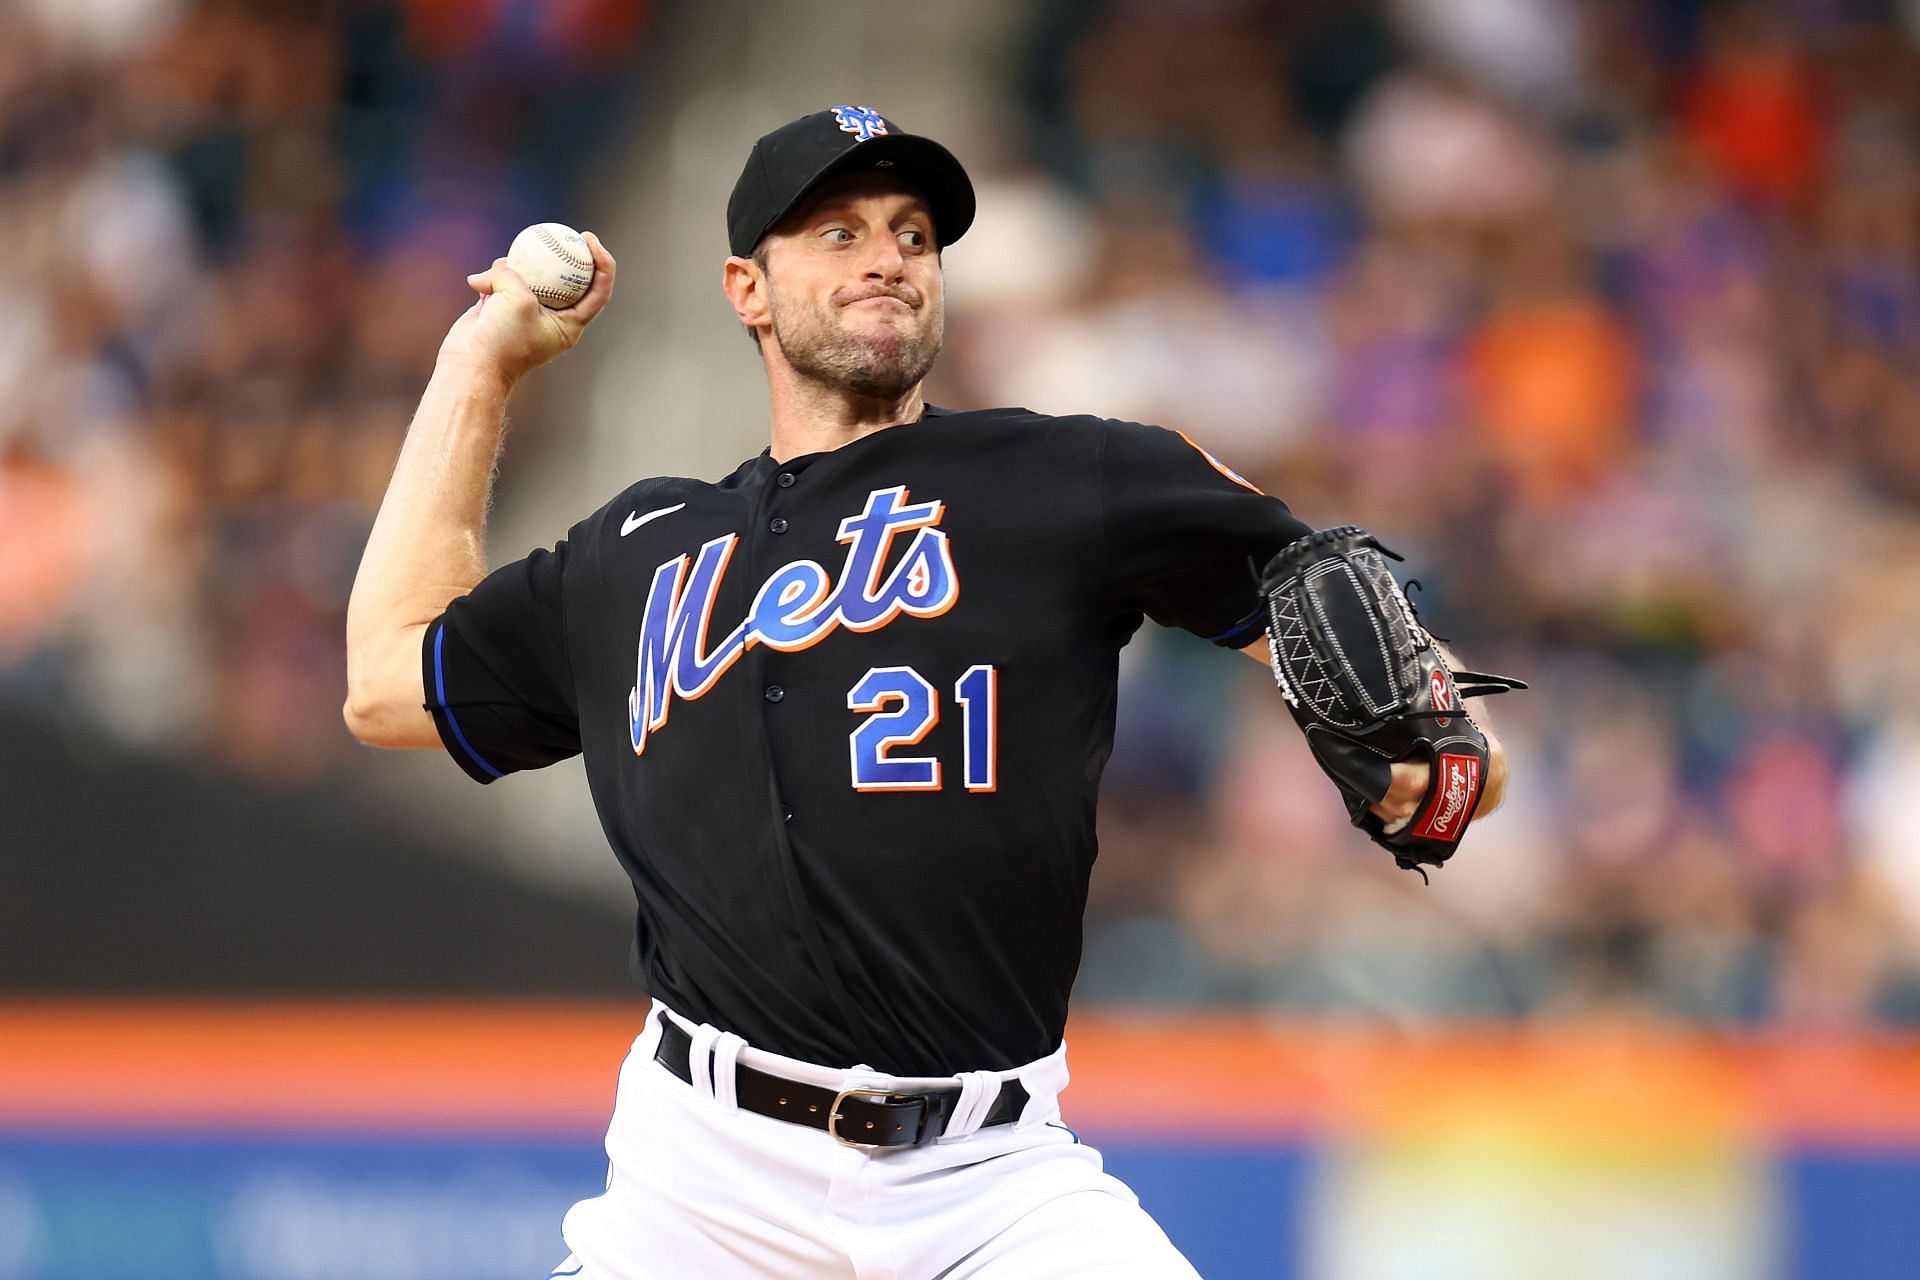 Max Scherzer of the New York Mets pitches in the first inning against the San Diego Padres at Citi Field